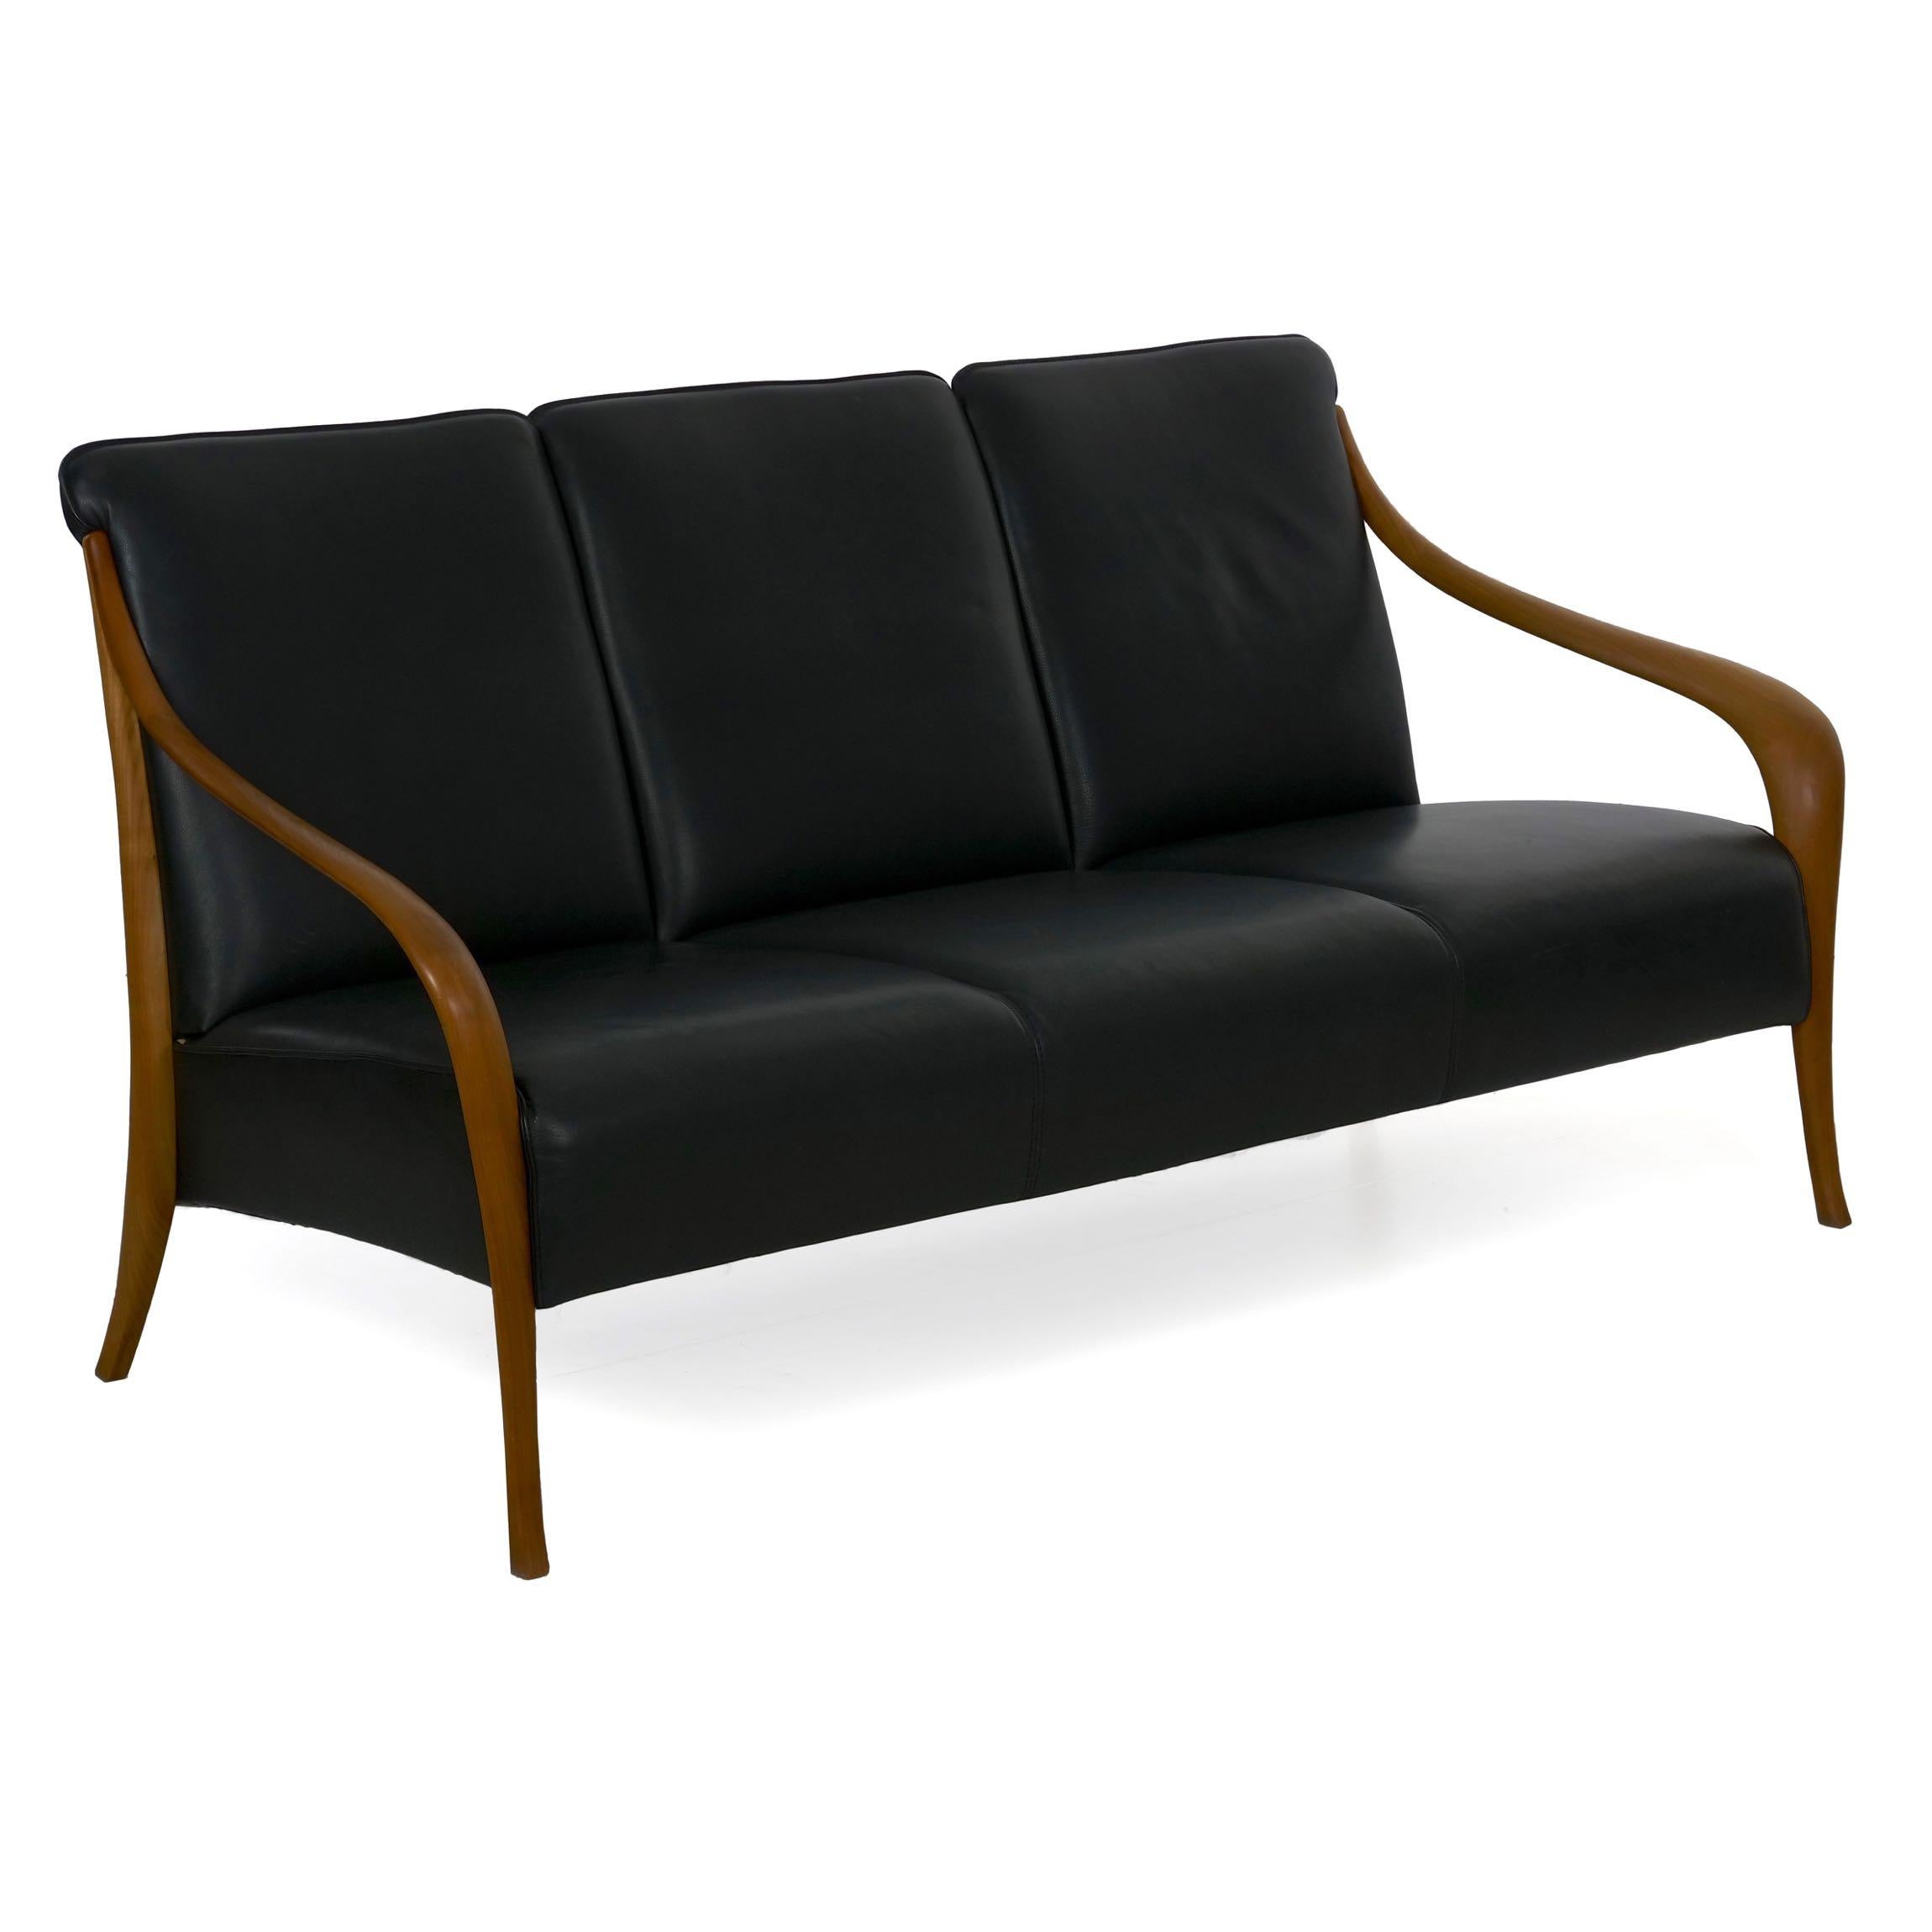 A very attractive Scandinavian Modern style sofa, the sculpted teak arms are an unusually powerful design element. Bold and robust, they have a very natural and relentless curvature that terminates in an ever so slightly outward splayed leg. These